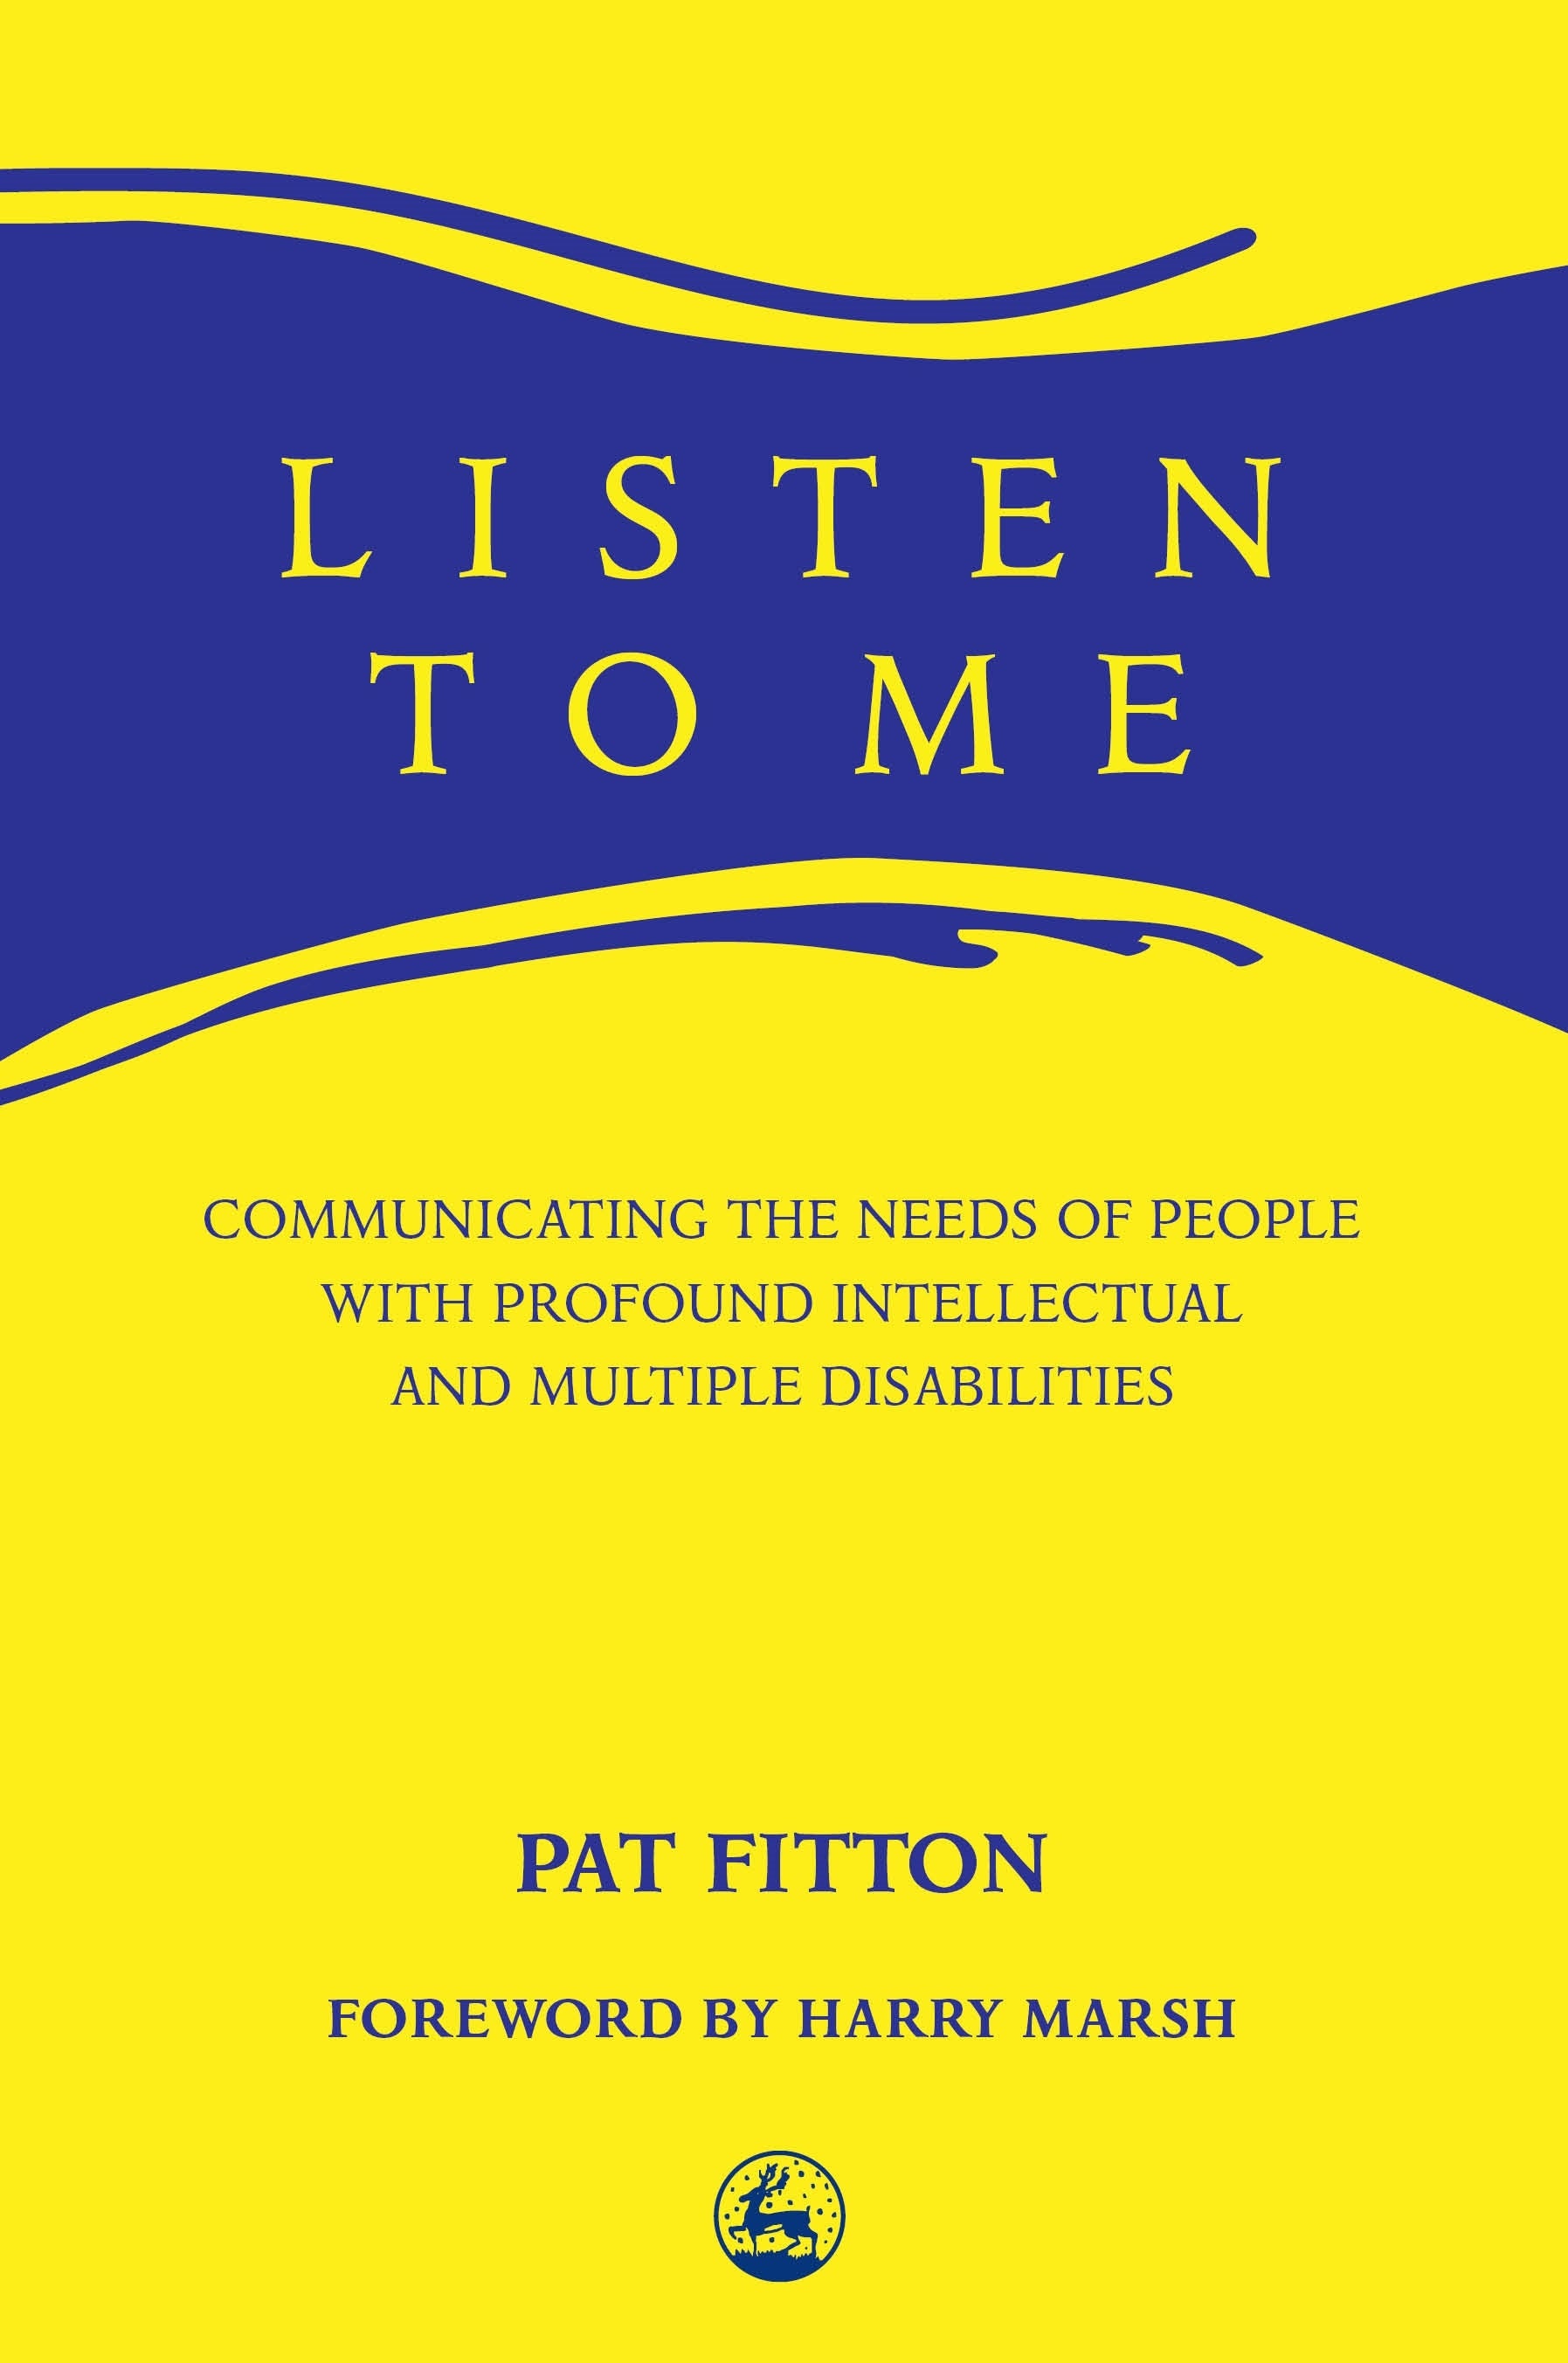 Listen To Me by Pat Fitton